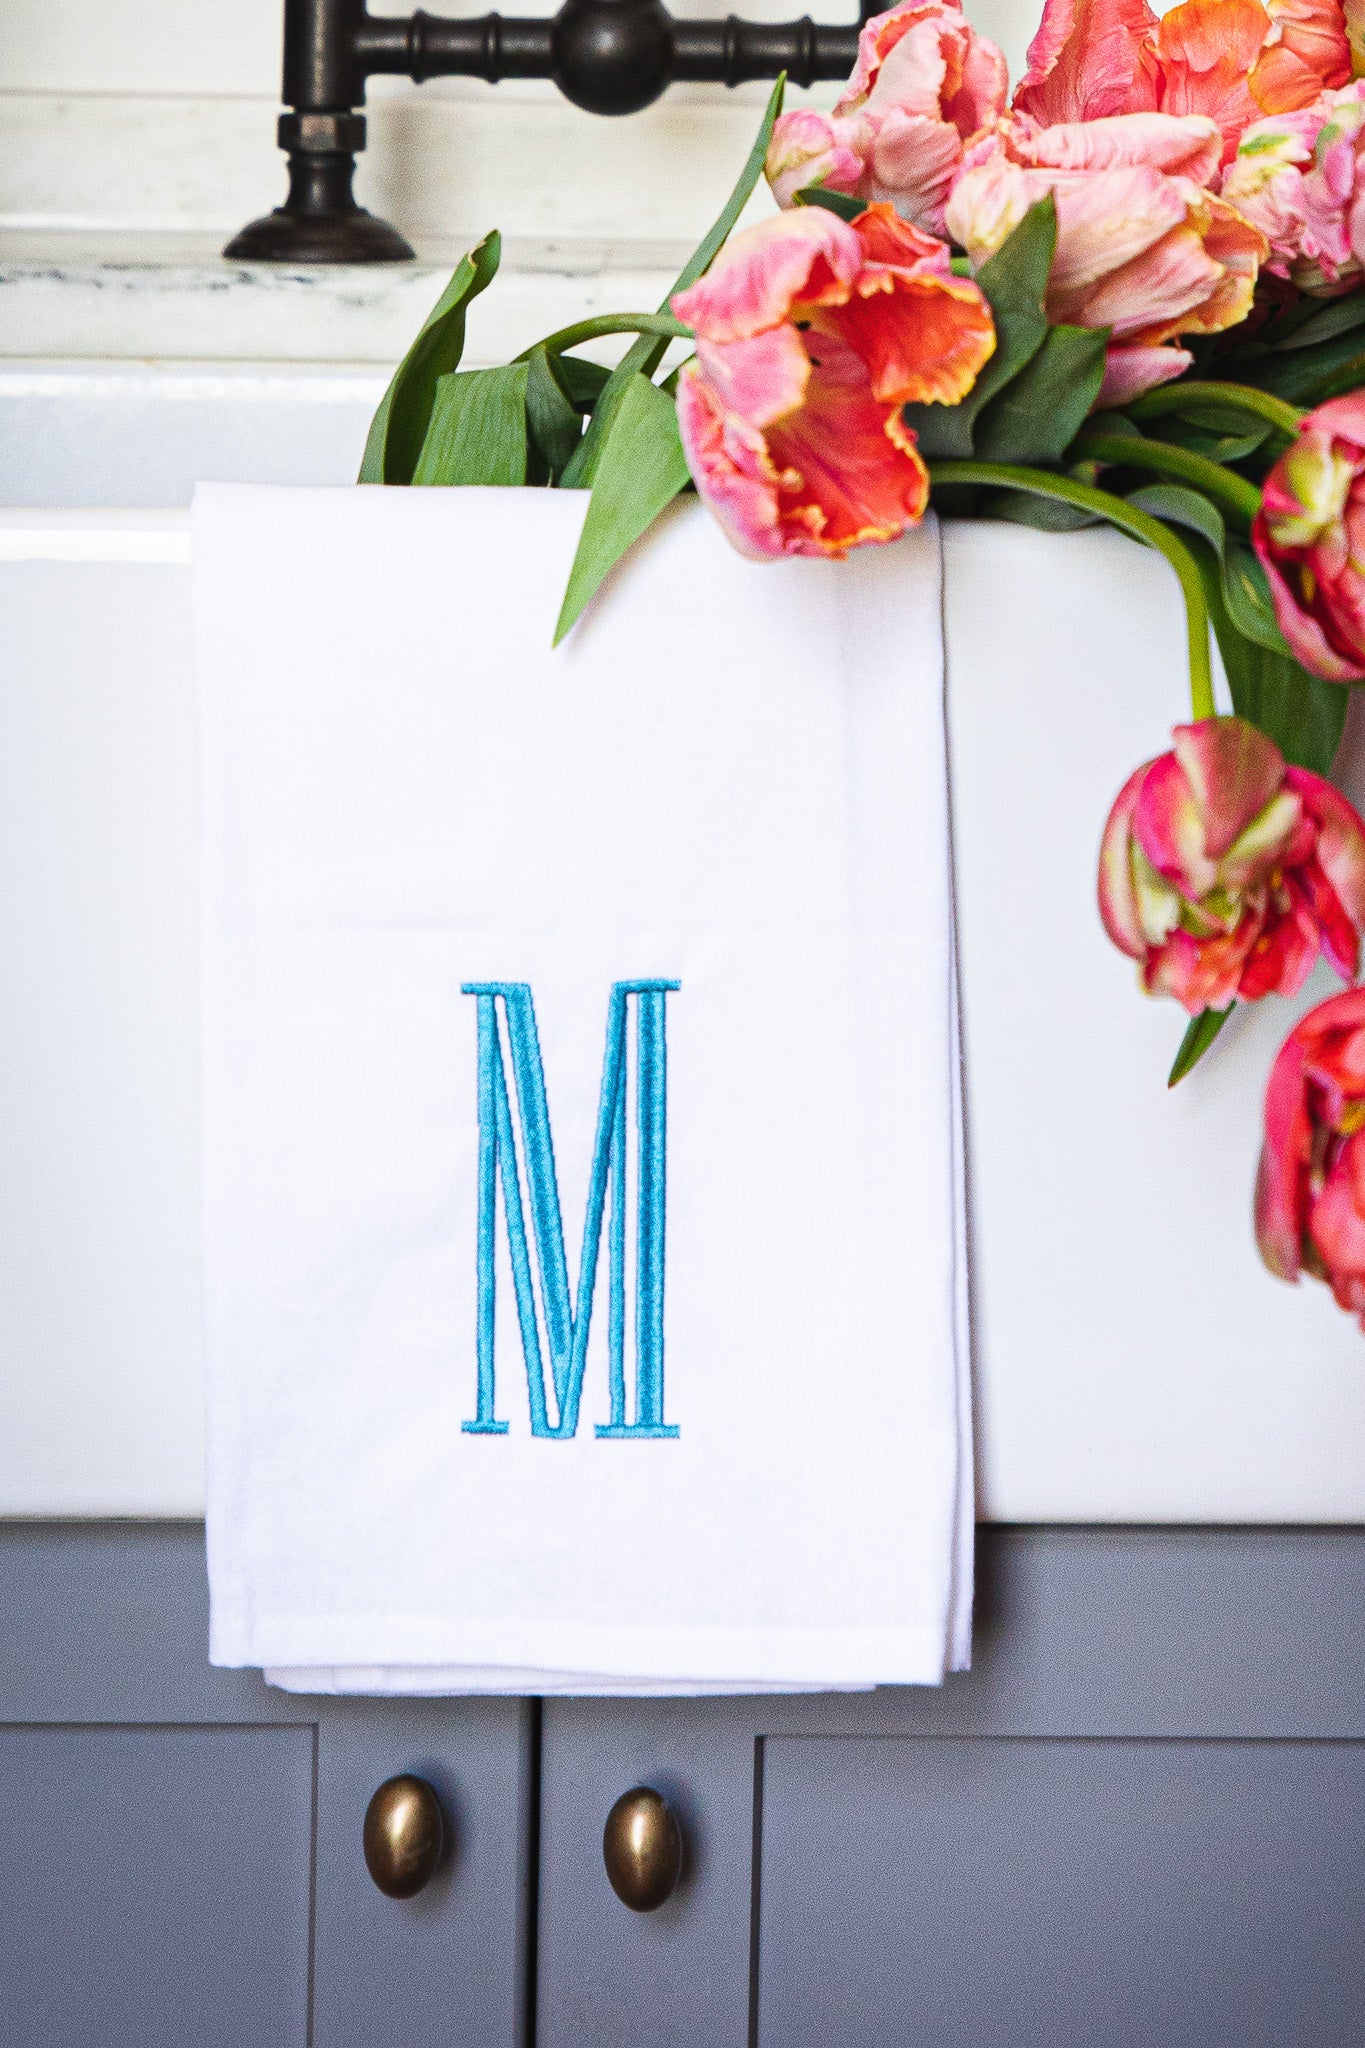 wholesale diy towel embroidery alphabet initial